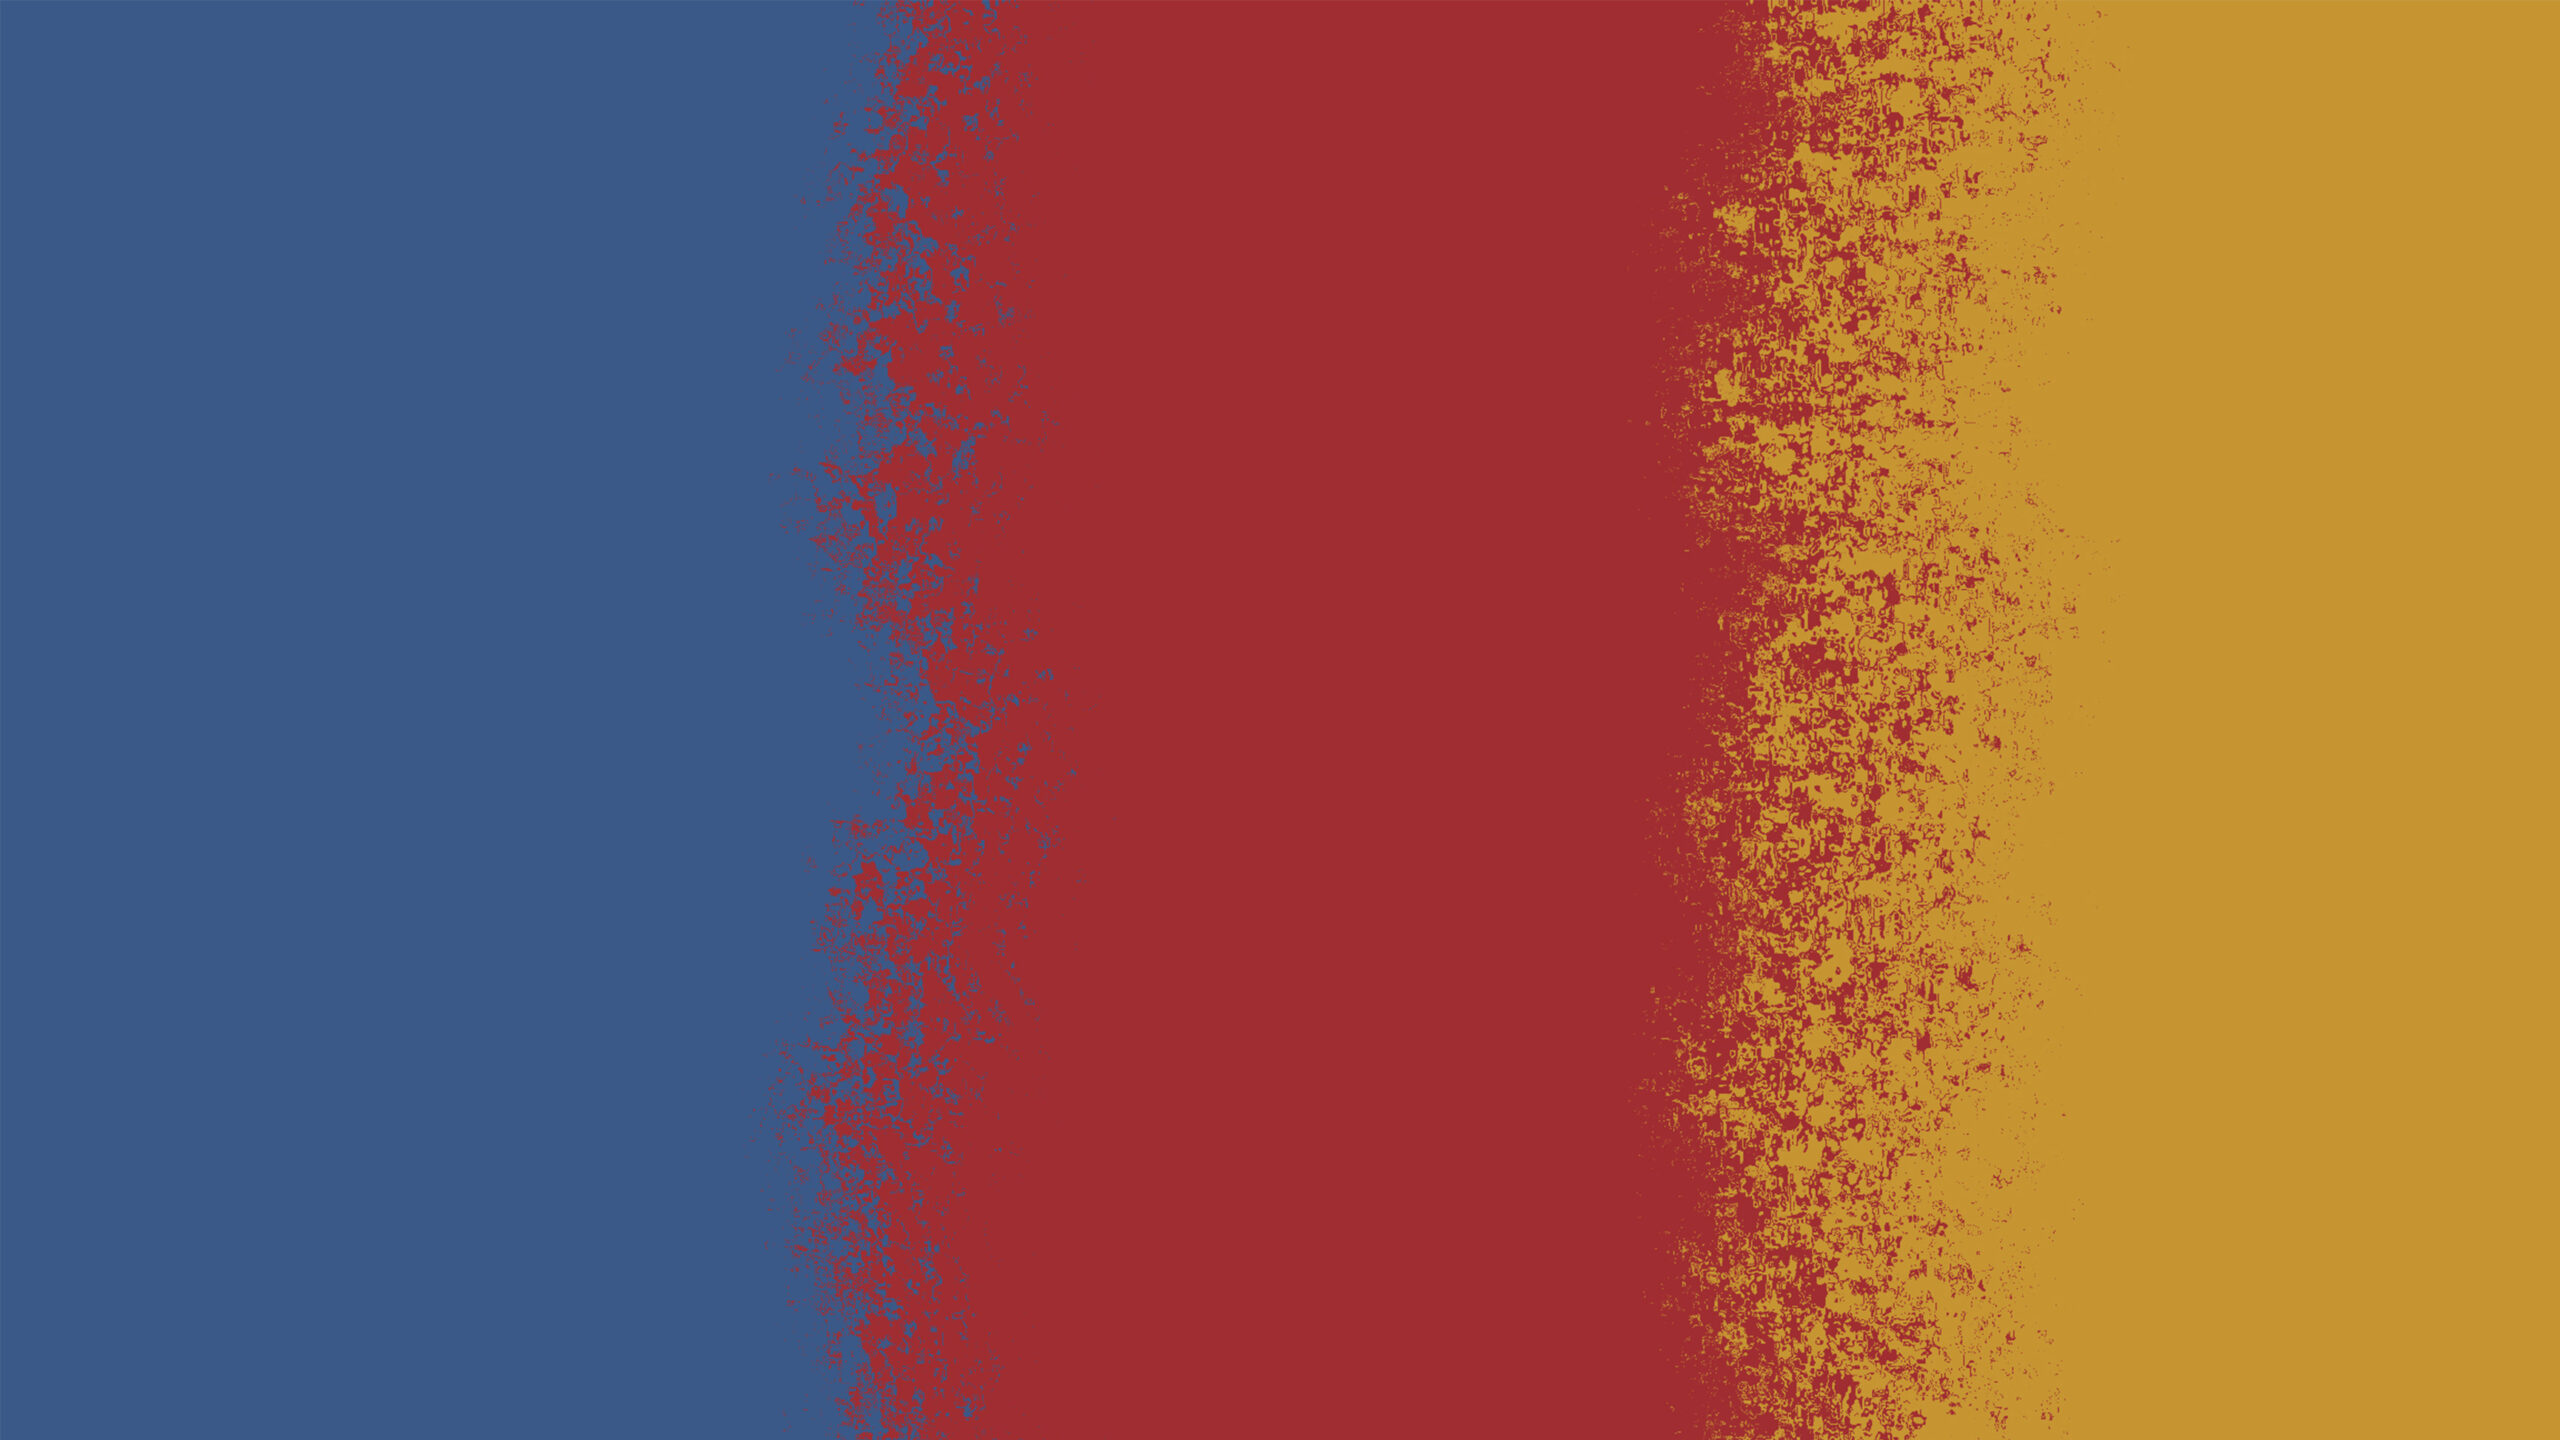 blue, red and yellow blocks of colour